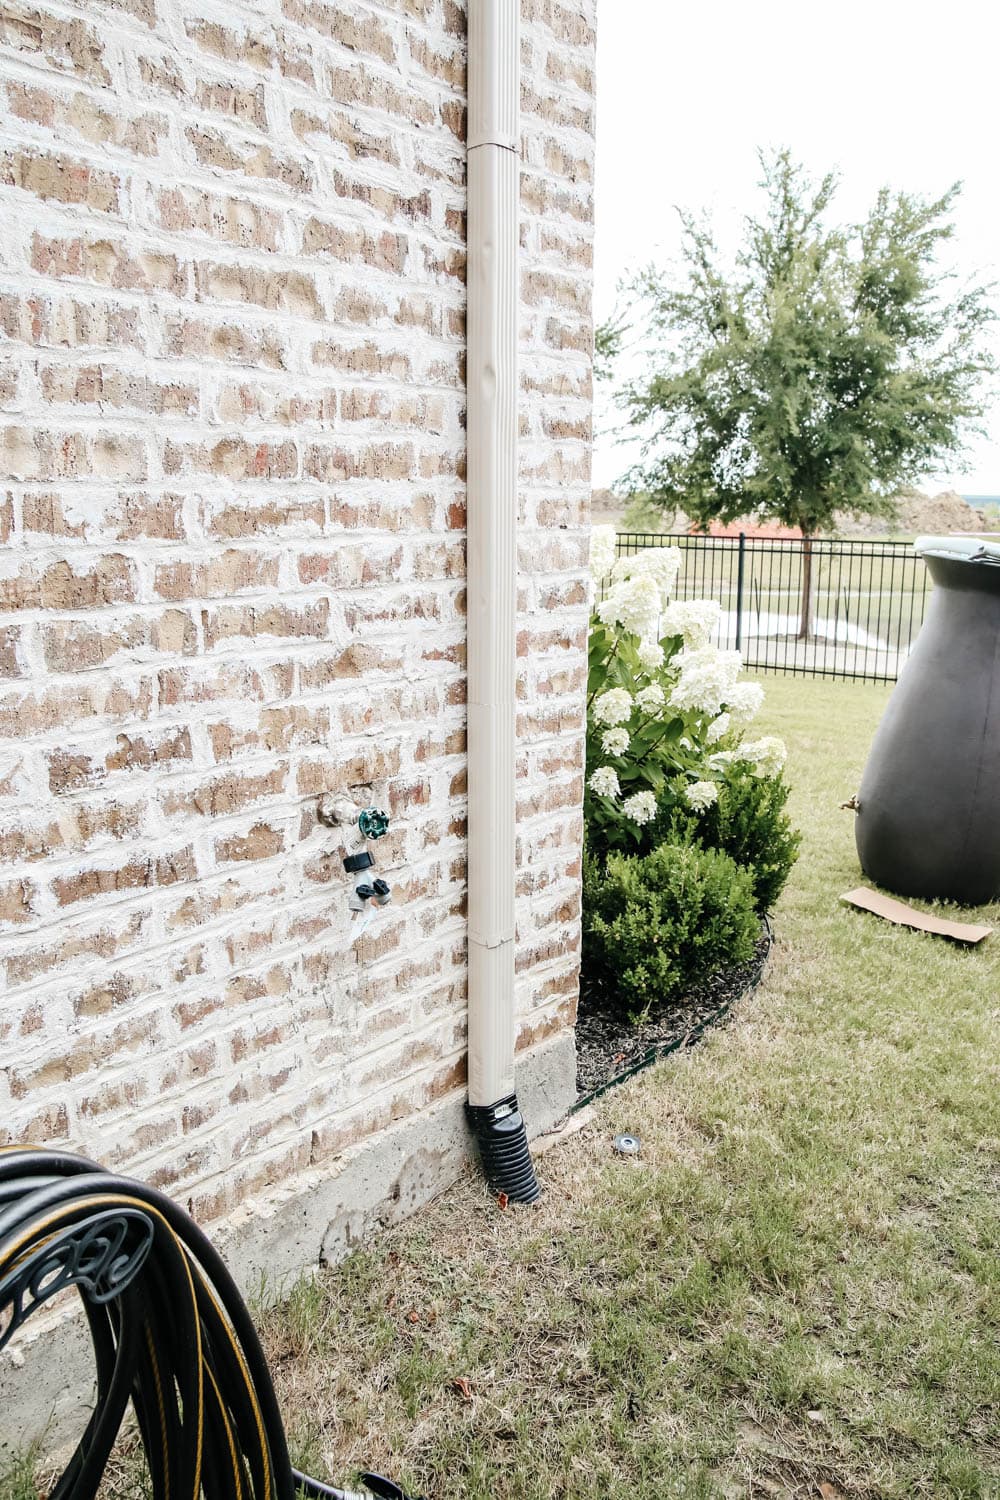 Install a rain barrel system for your home and save money and conserve your water supply. Simple step-by-step tutorial for installing a rain barrel. #ABlissfulNest